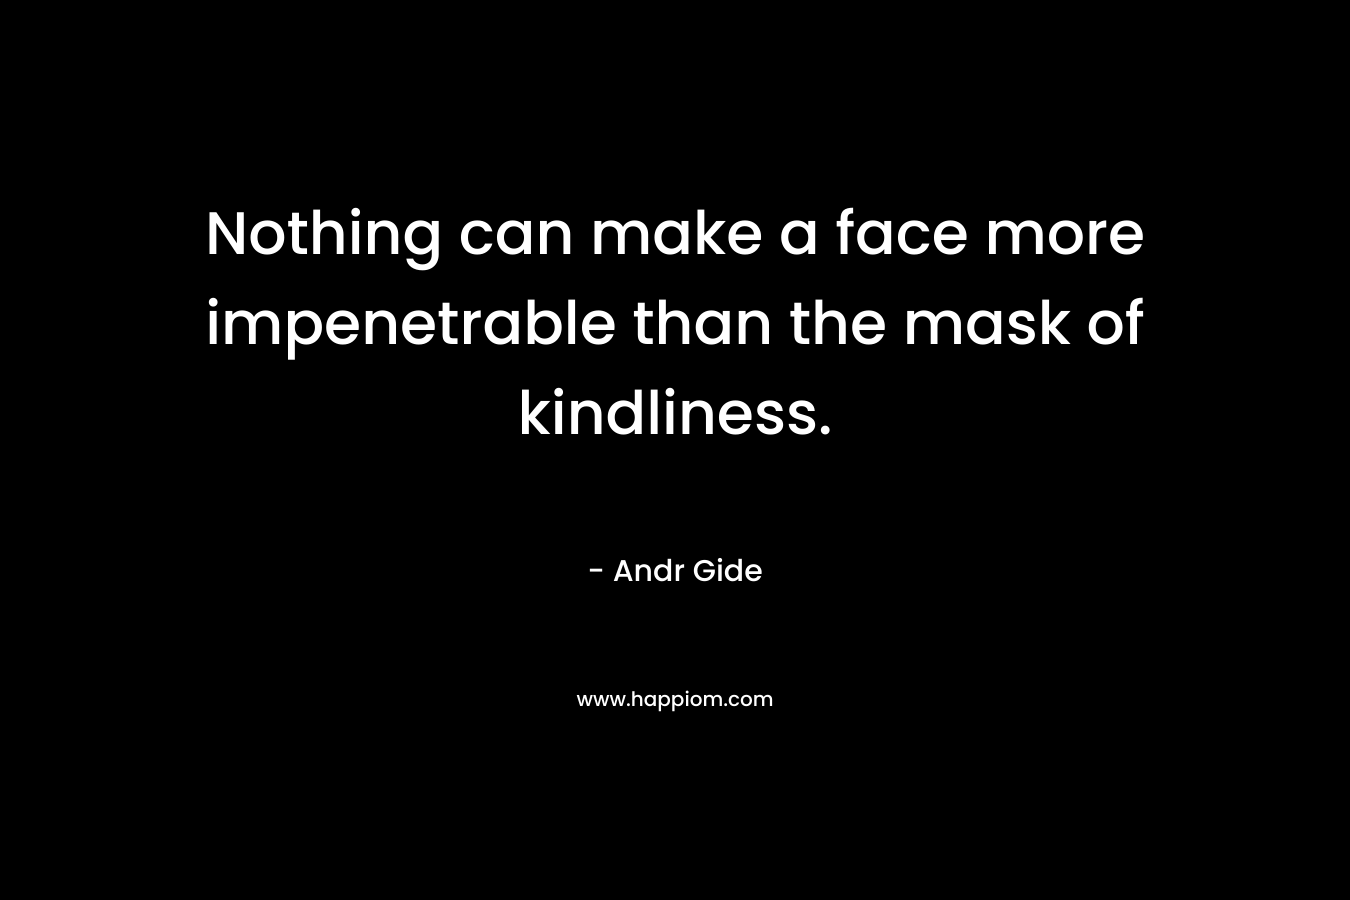 Nothing can make a face more impenetrable than the mask of kindliness.